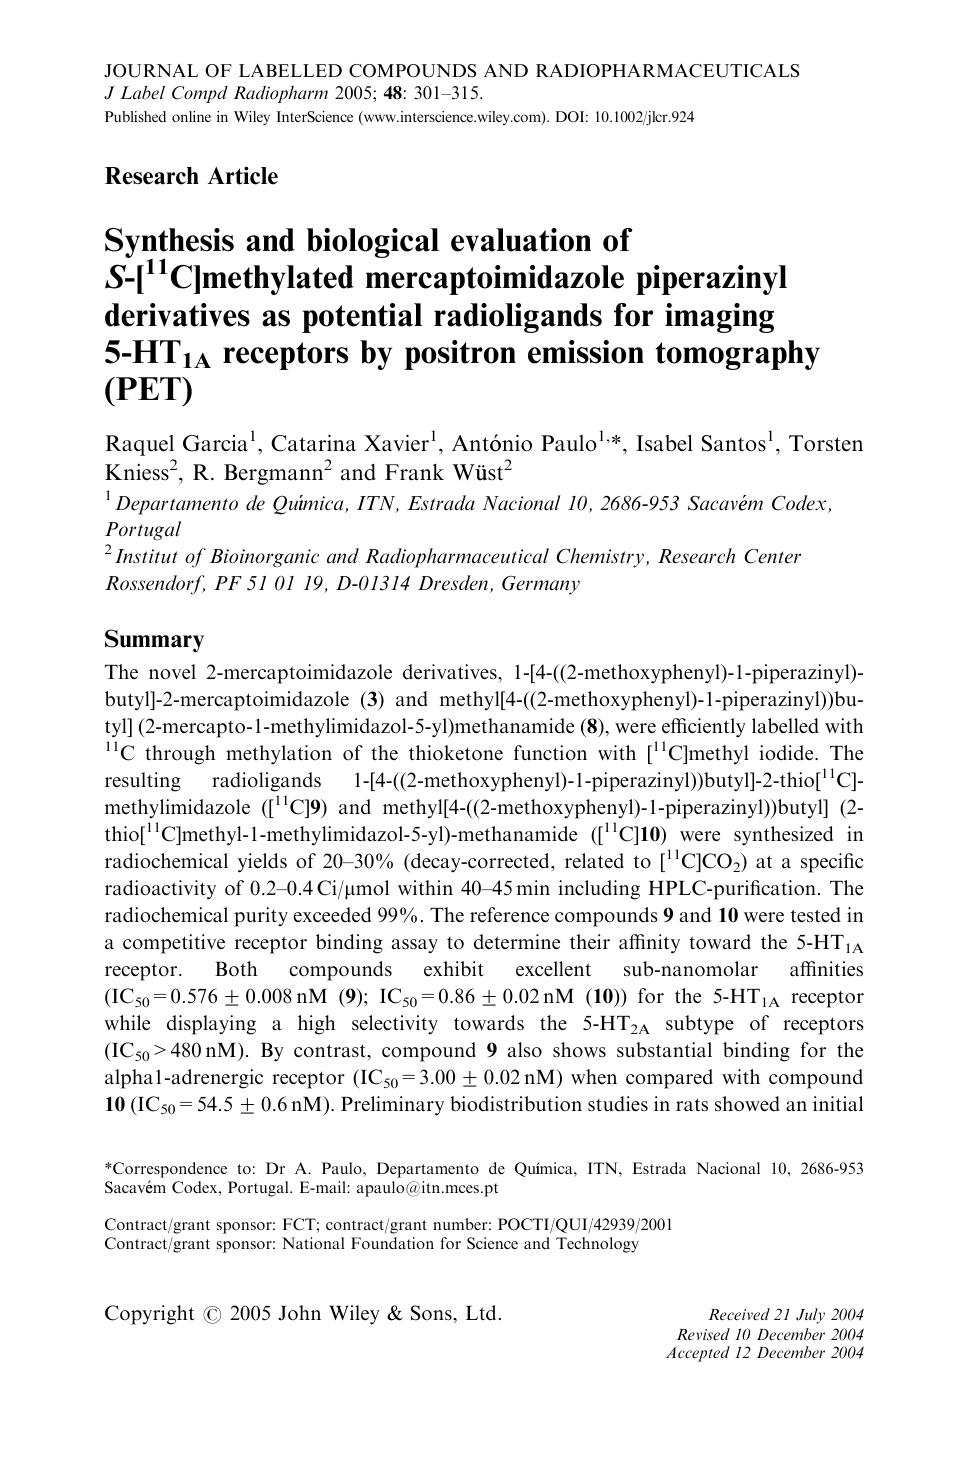 Synthesis and biological evaluation of S-[11C]methylated mercaptoimidazole piperazinyl derivatives as potential radioligands for imaging 5-HT1A receptors by positron emission tomography (PET) by Unknown